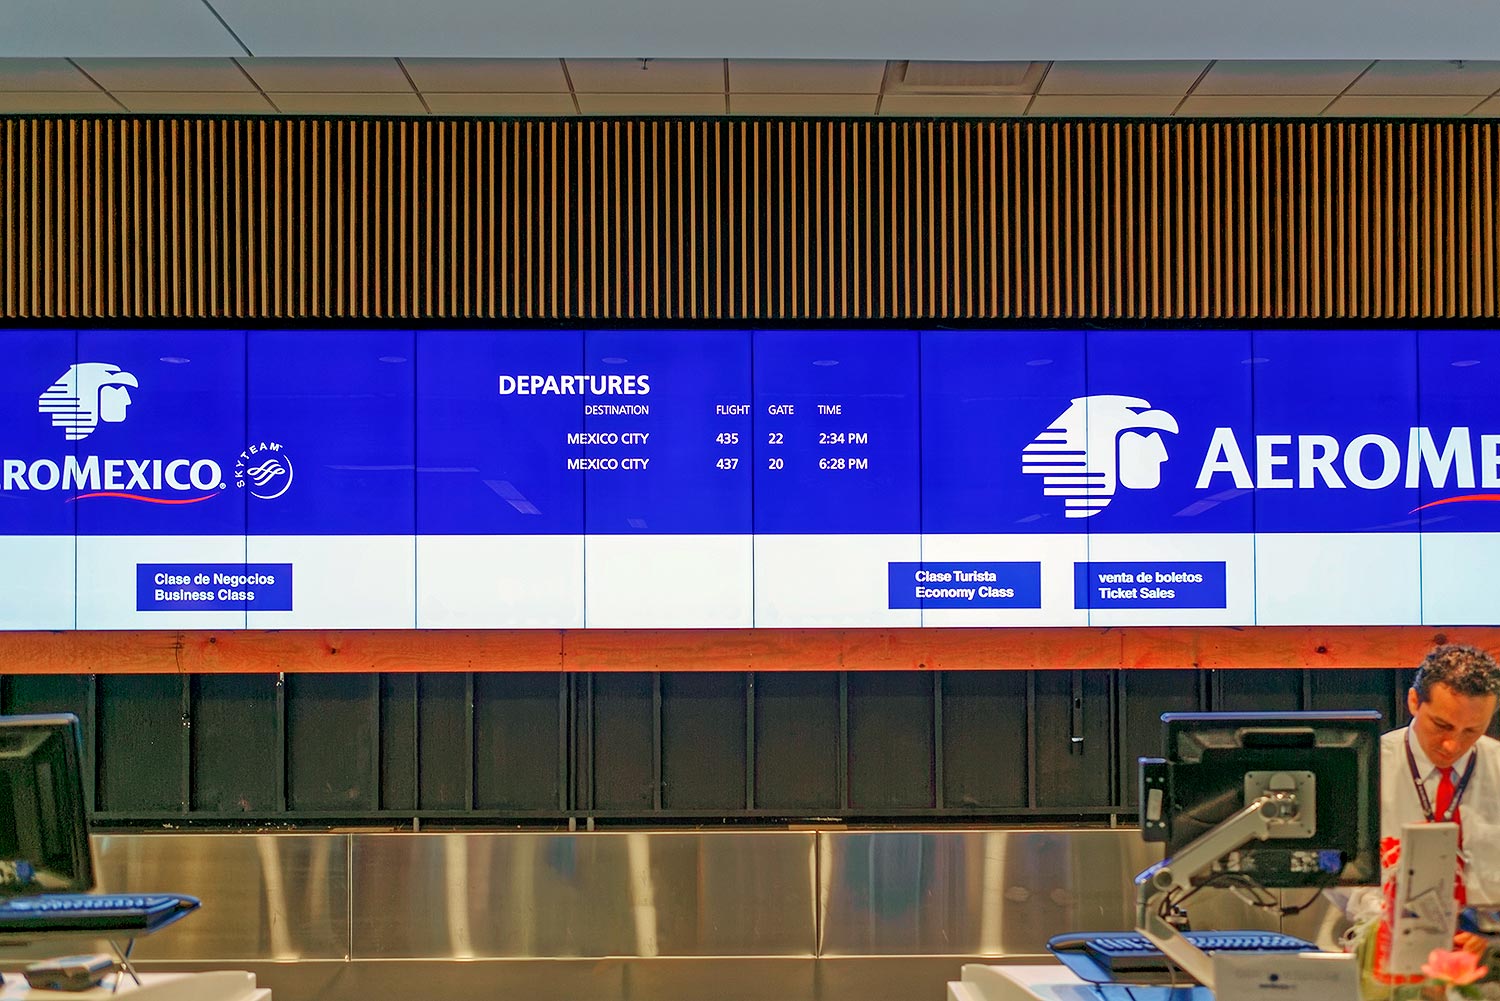 The continuous videowall above the ticketing area provides a constant flow of information to queueing passengers.